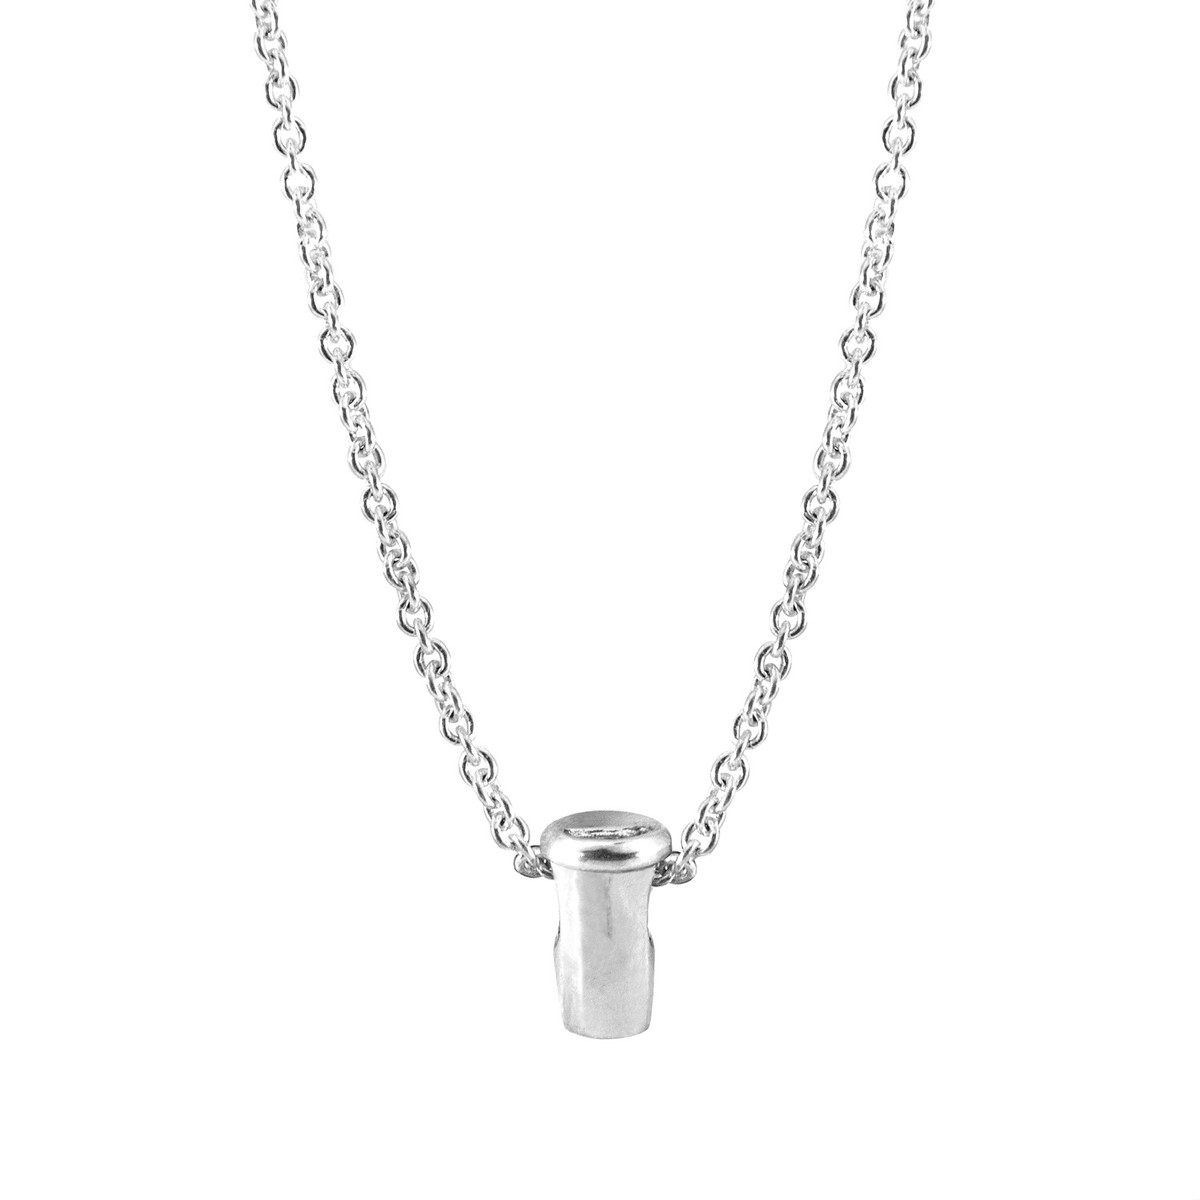 Anchor & Crew GUSTATORY Coffee Takeout Cup Silver Necklace Pendant